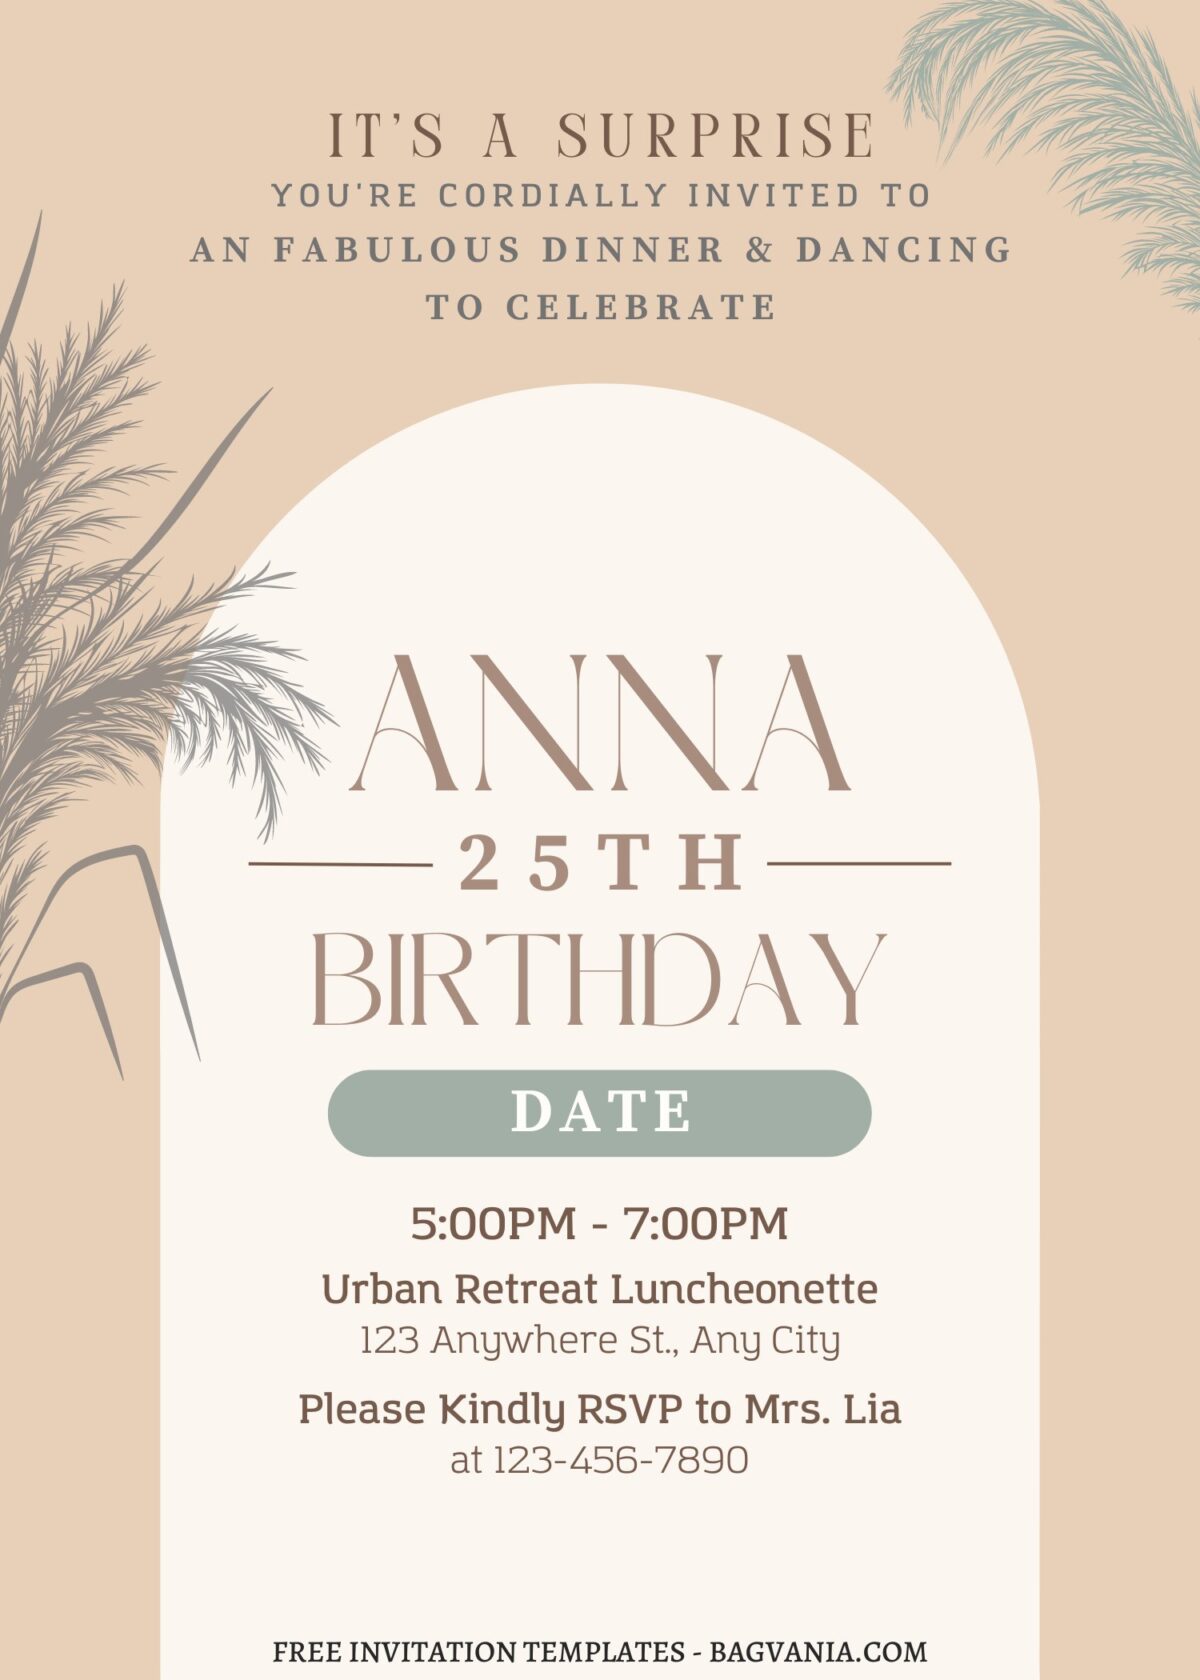 (Free) 9+ Aesthetic Summer Love Canva Birthday Invitation Templates with dried pampas